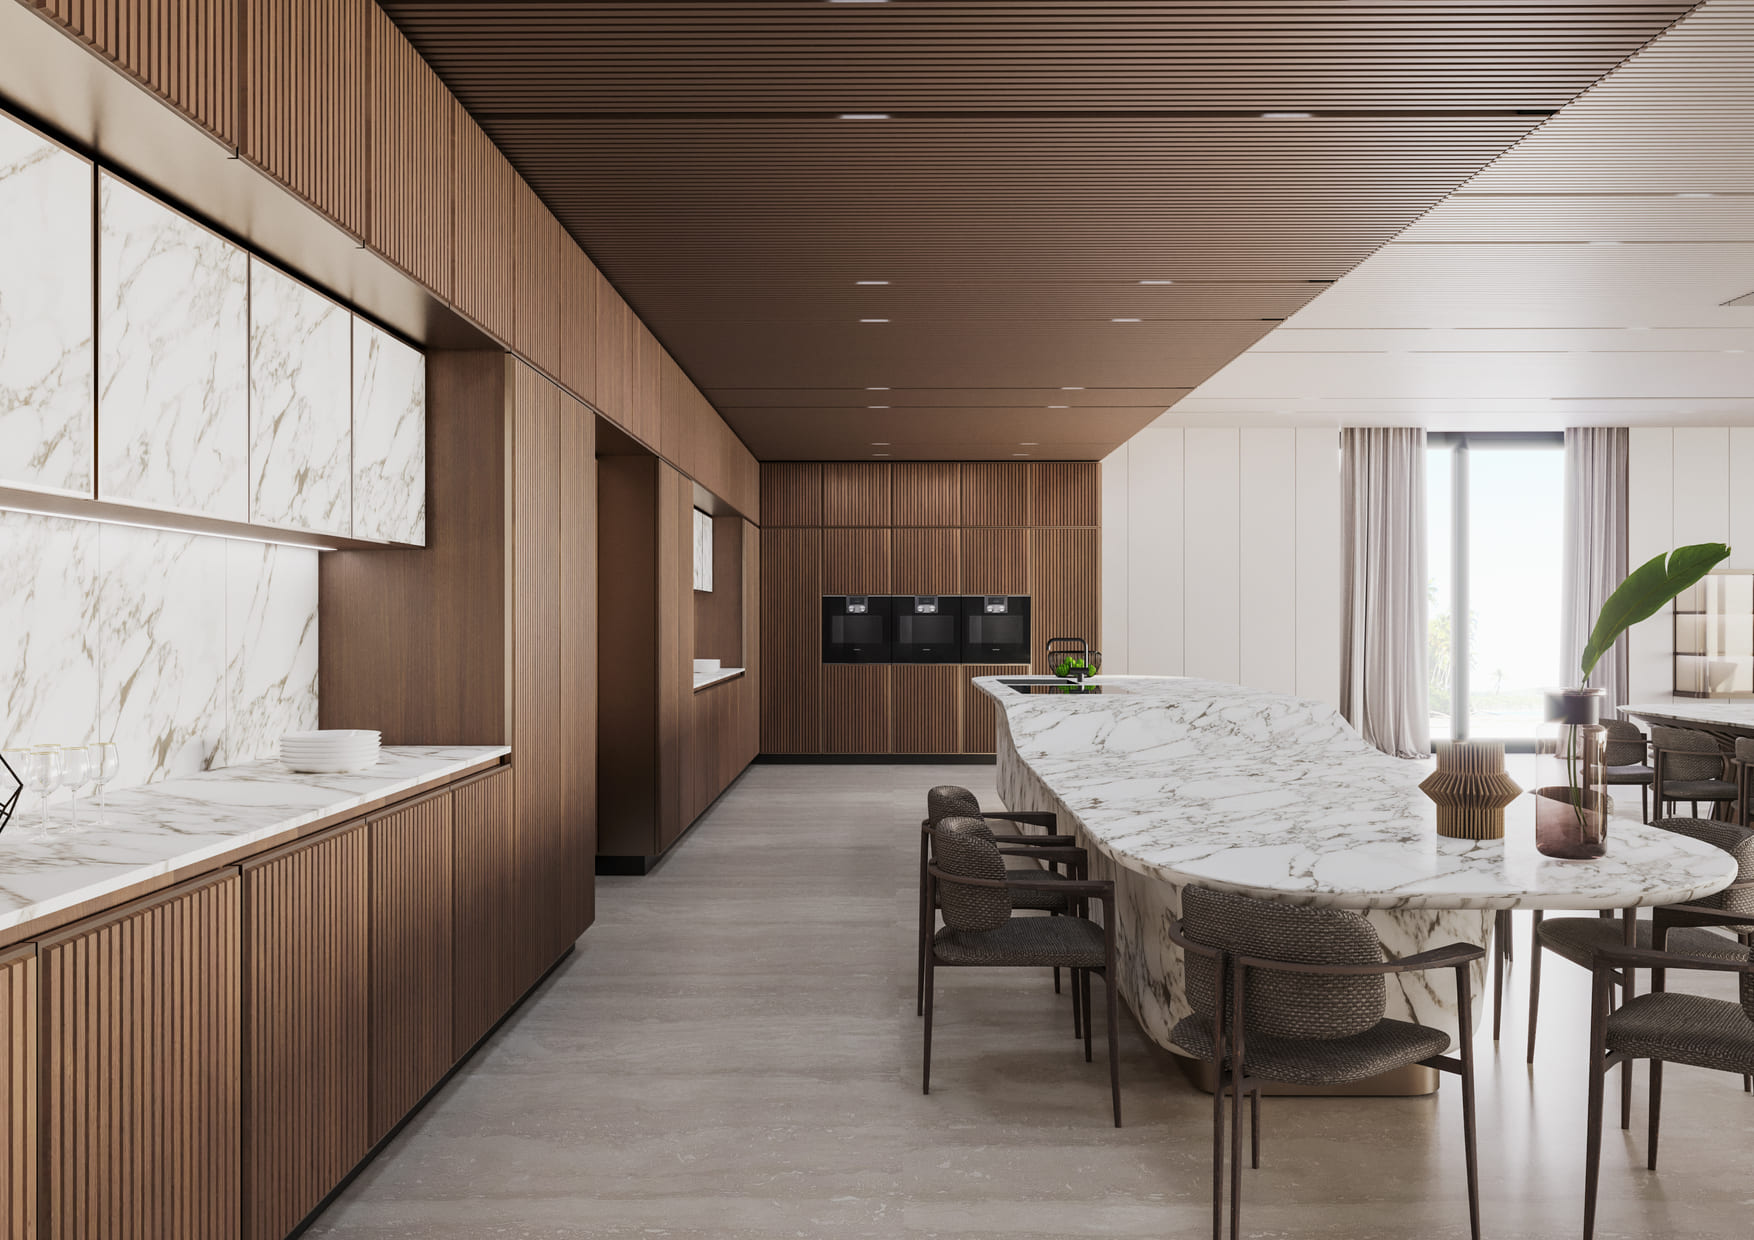 A sleek kitchen with wood paneling, marble countertops, and a large marble island with woven chairs. The space is well-lit, featuring clean lines and a minimalist design.